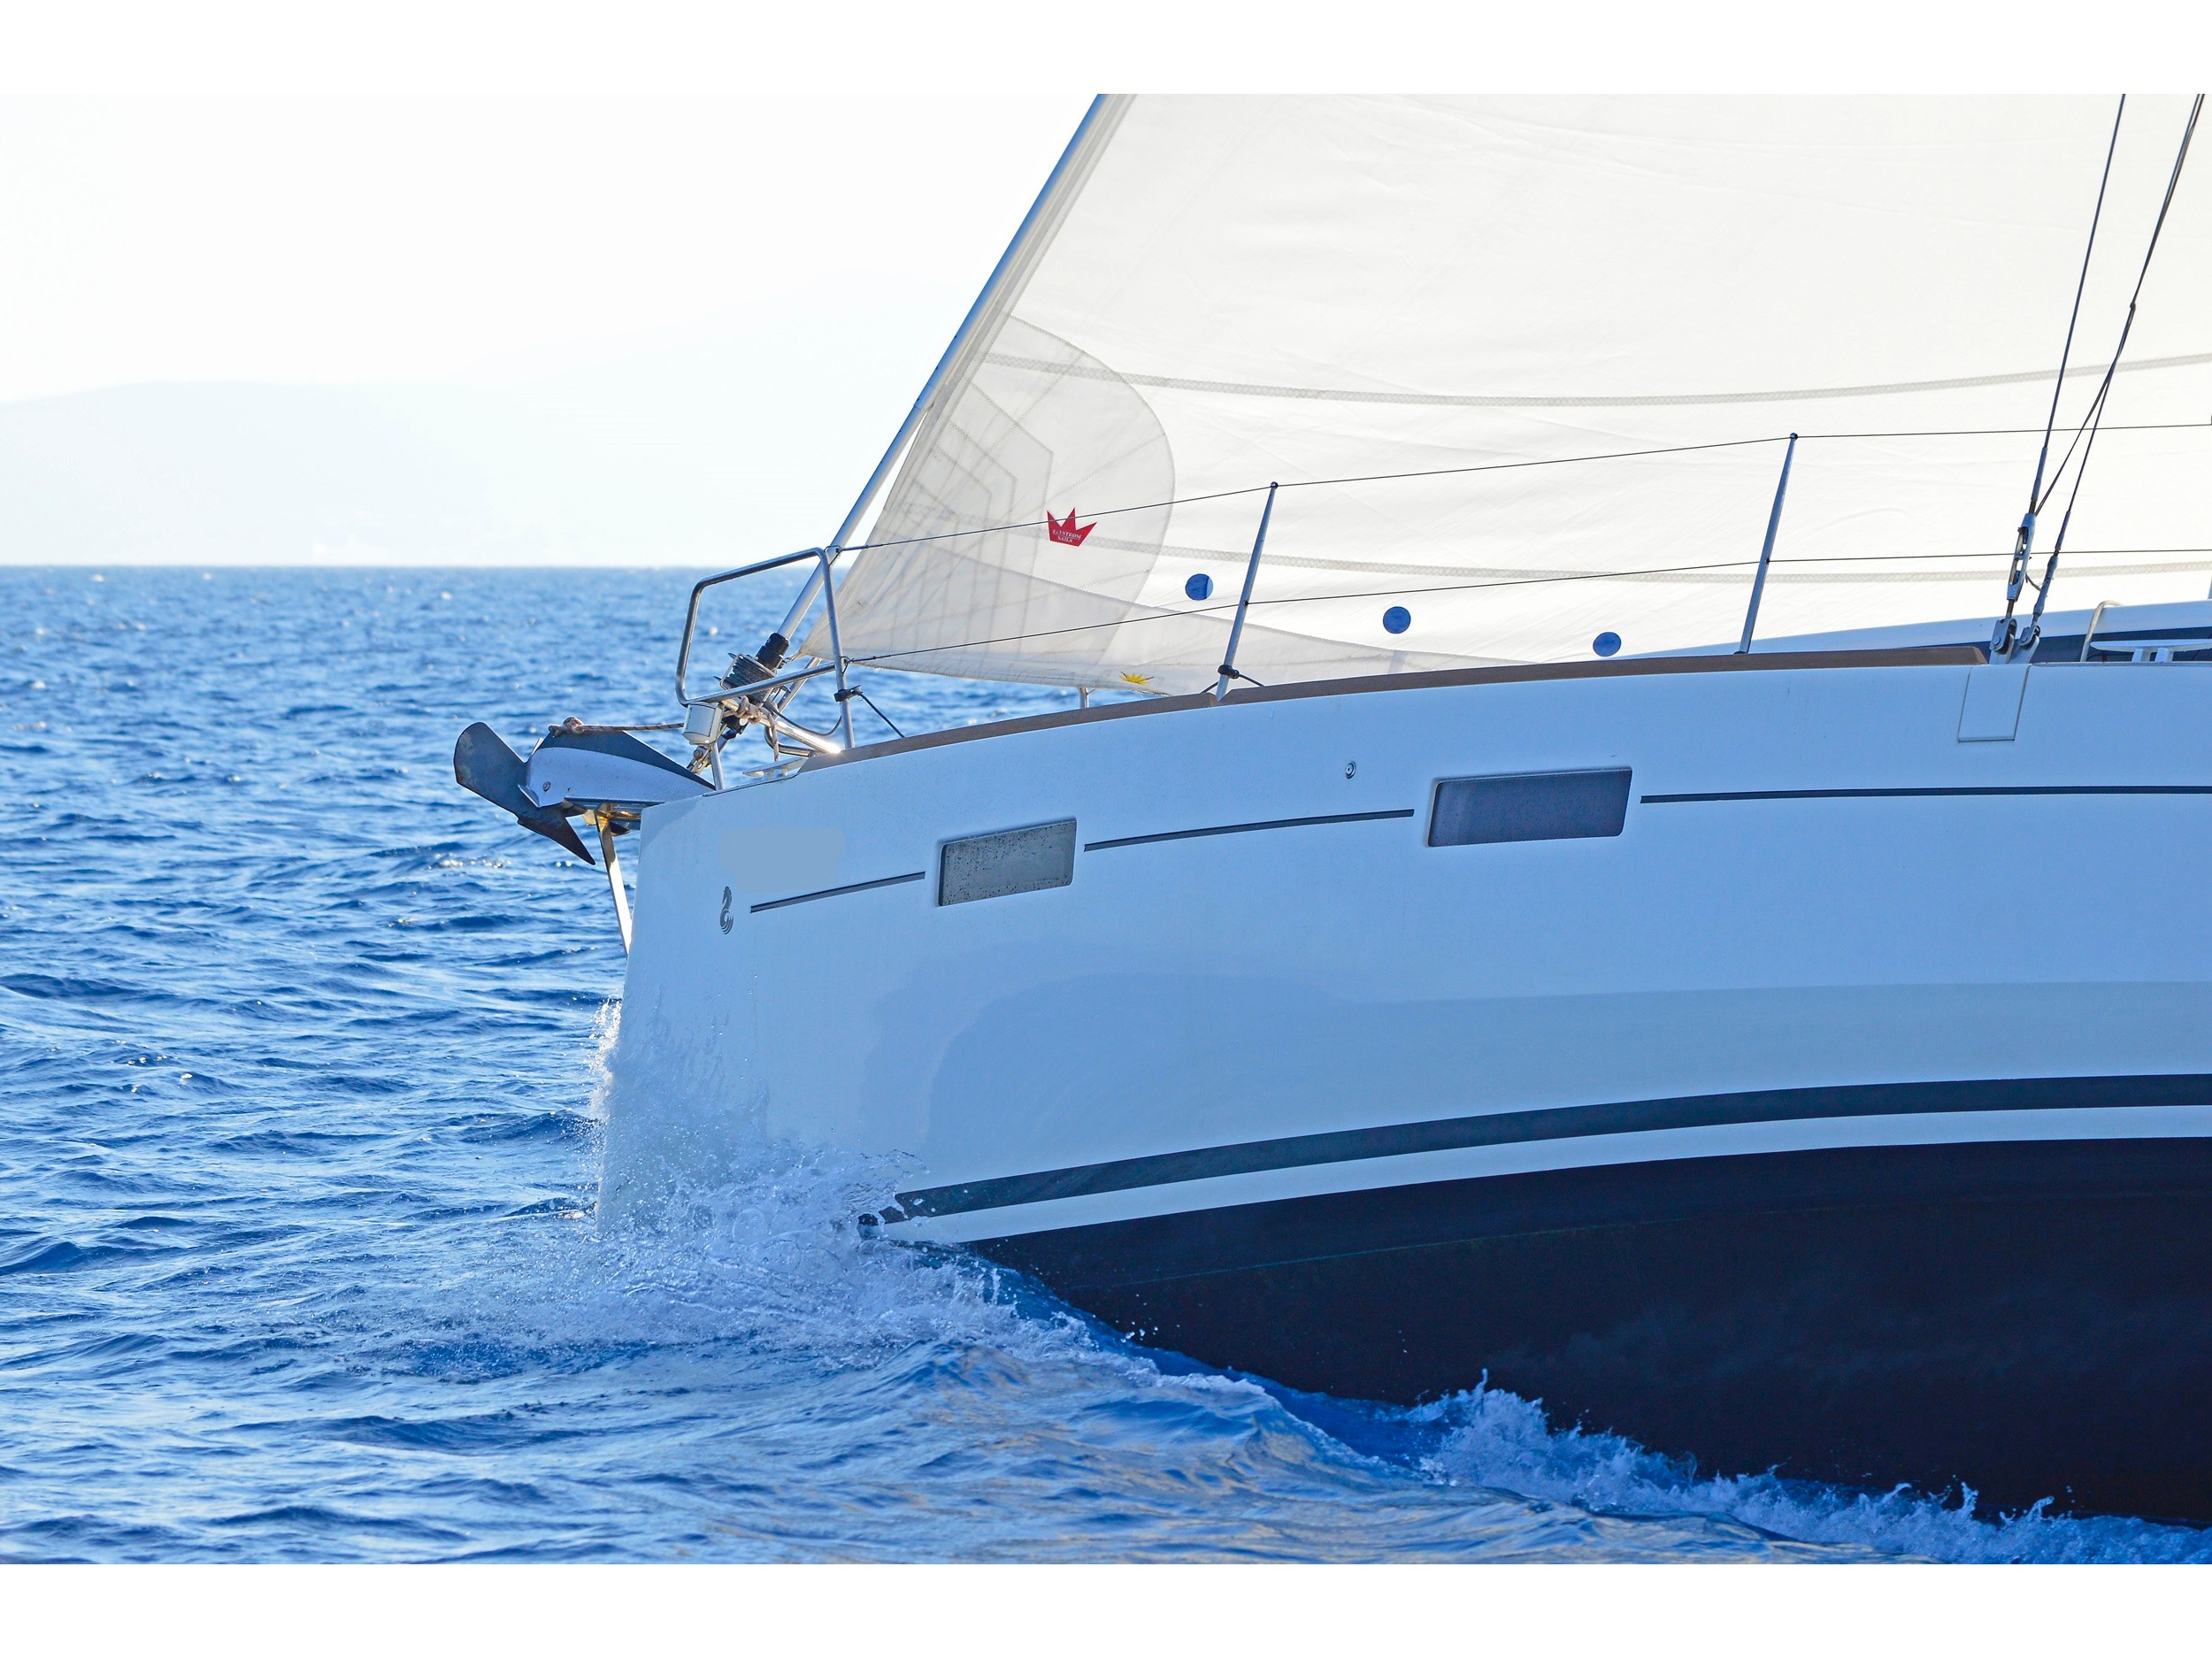 Oceanis 41, Greece, Dodecanese, Cost